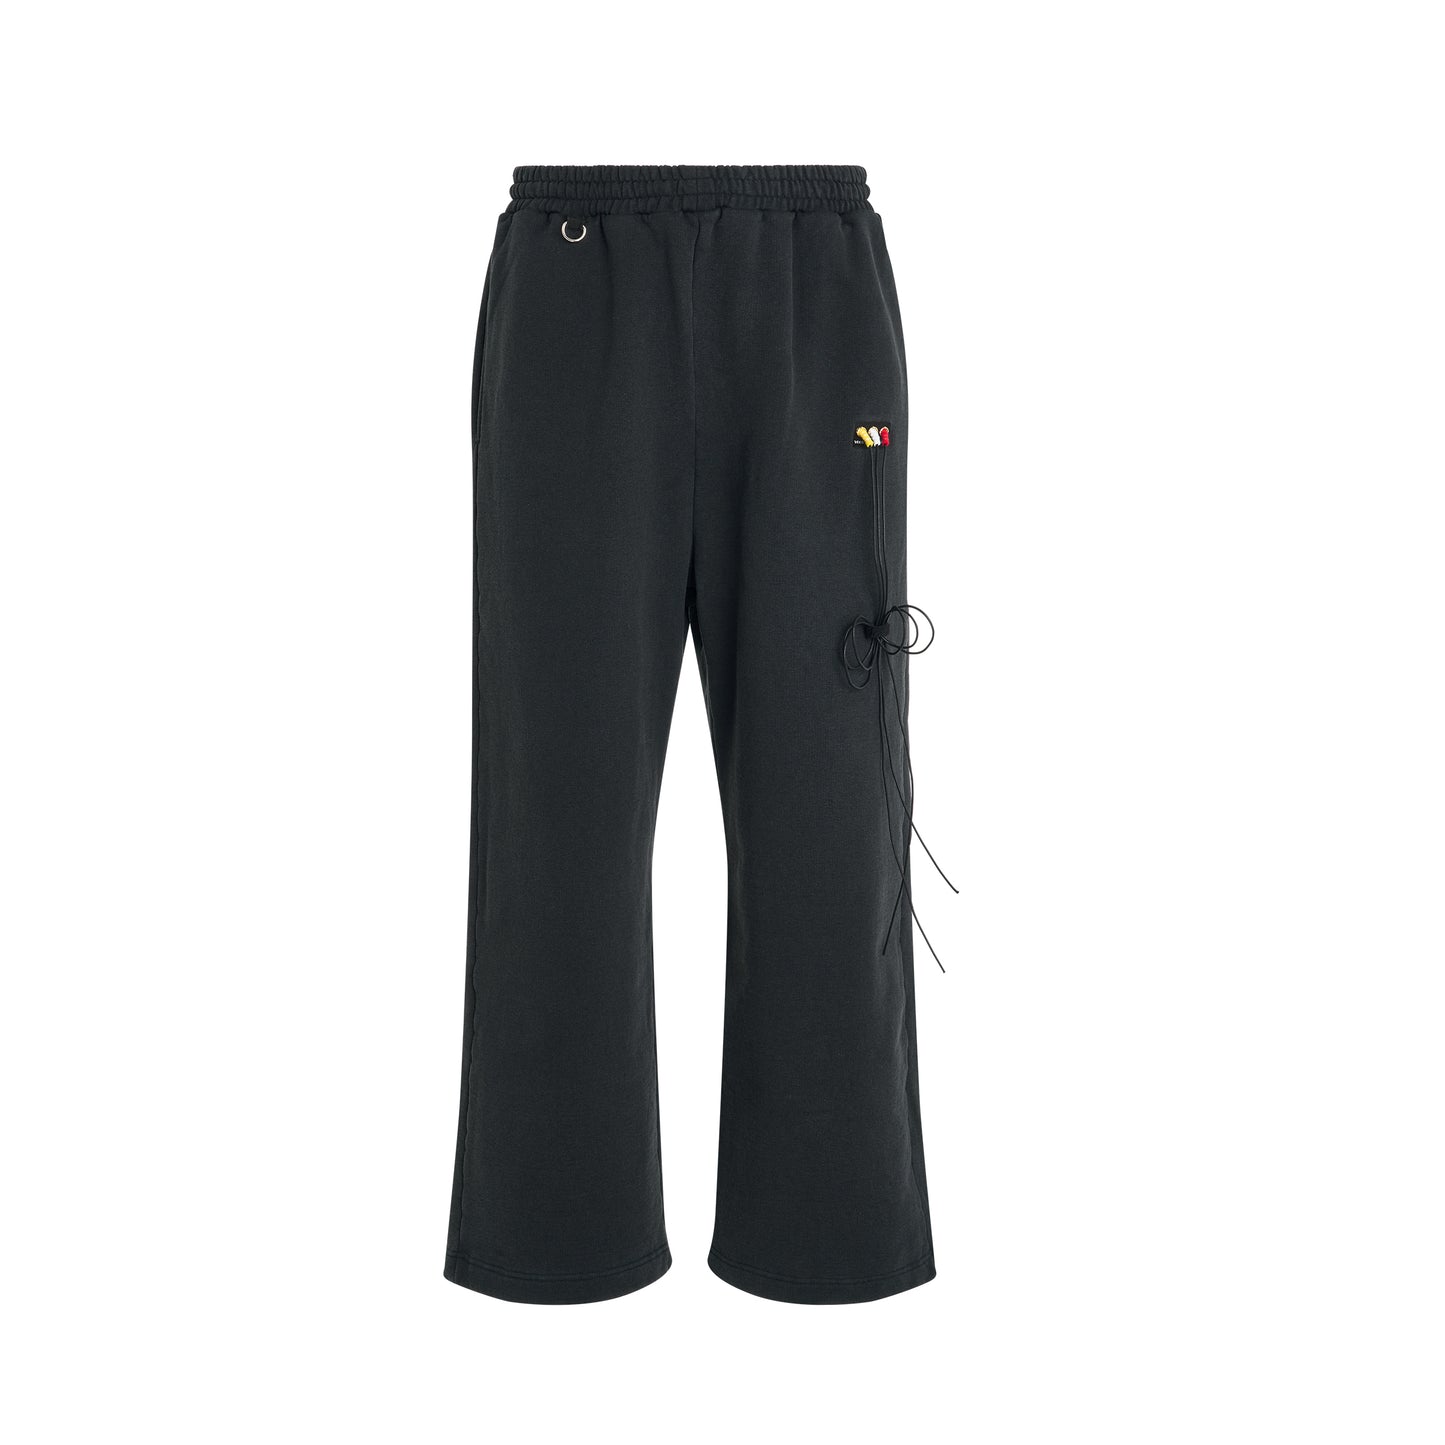 RCA Cable Embroidery Sweatpants in Black